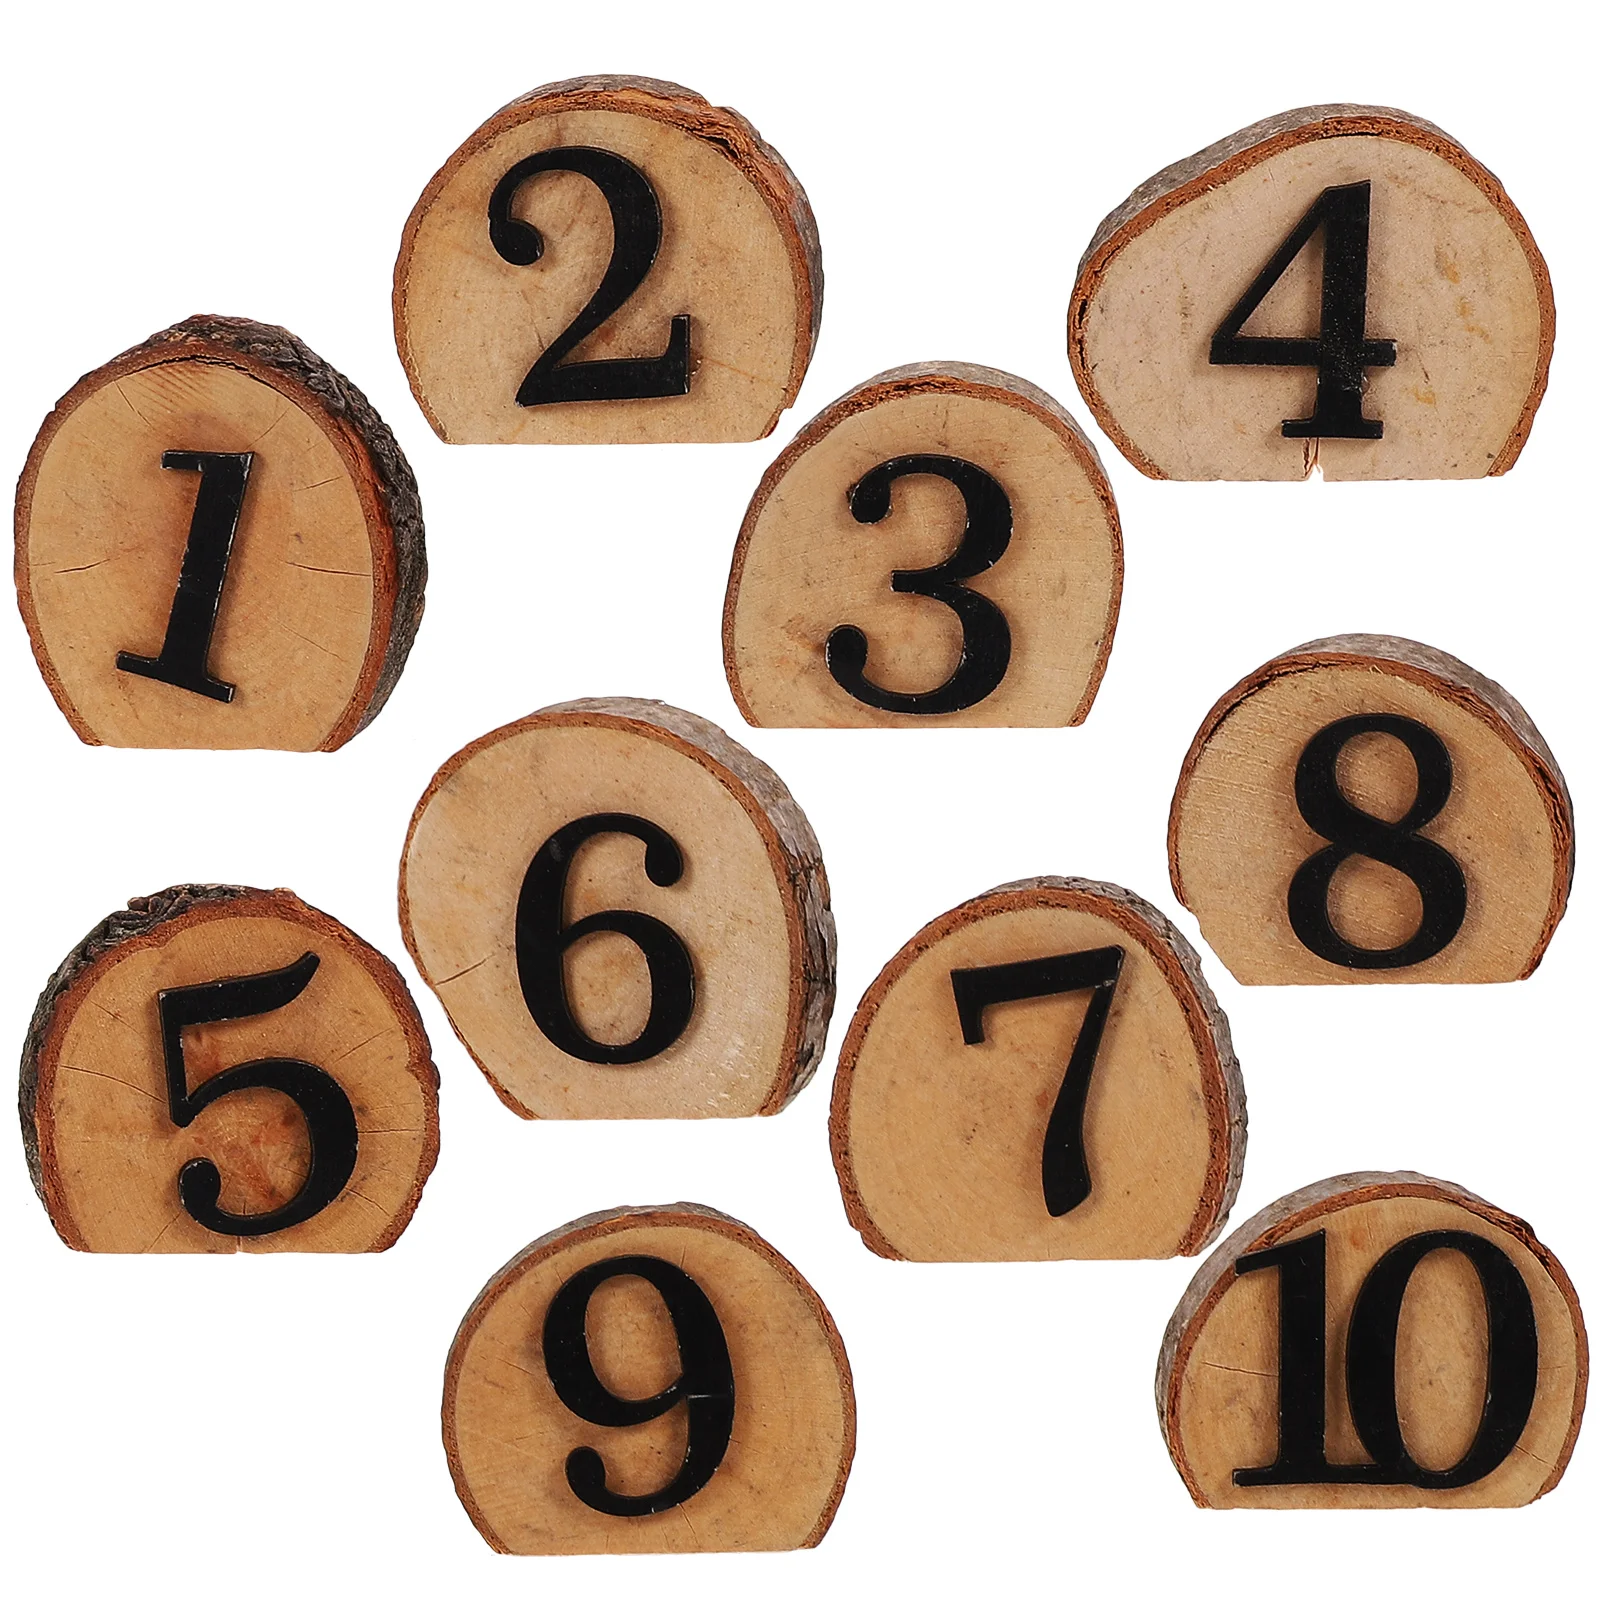 

Number Seat Wedding Birthday Table Numbers Wooden Reception Restaurant Centerpieces Decor Seats Signs Crafts